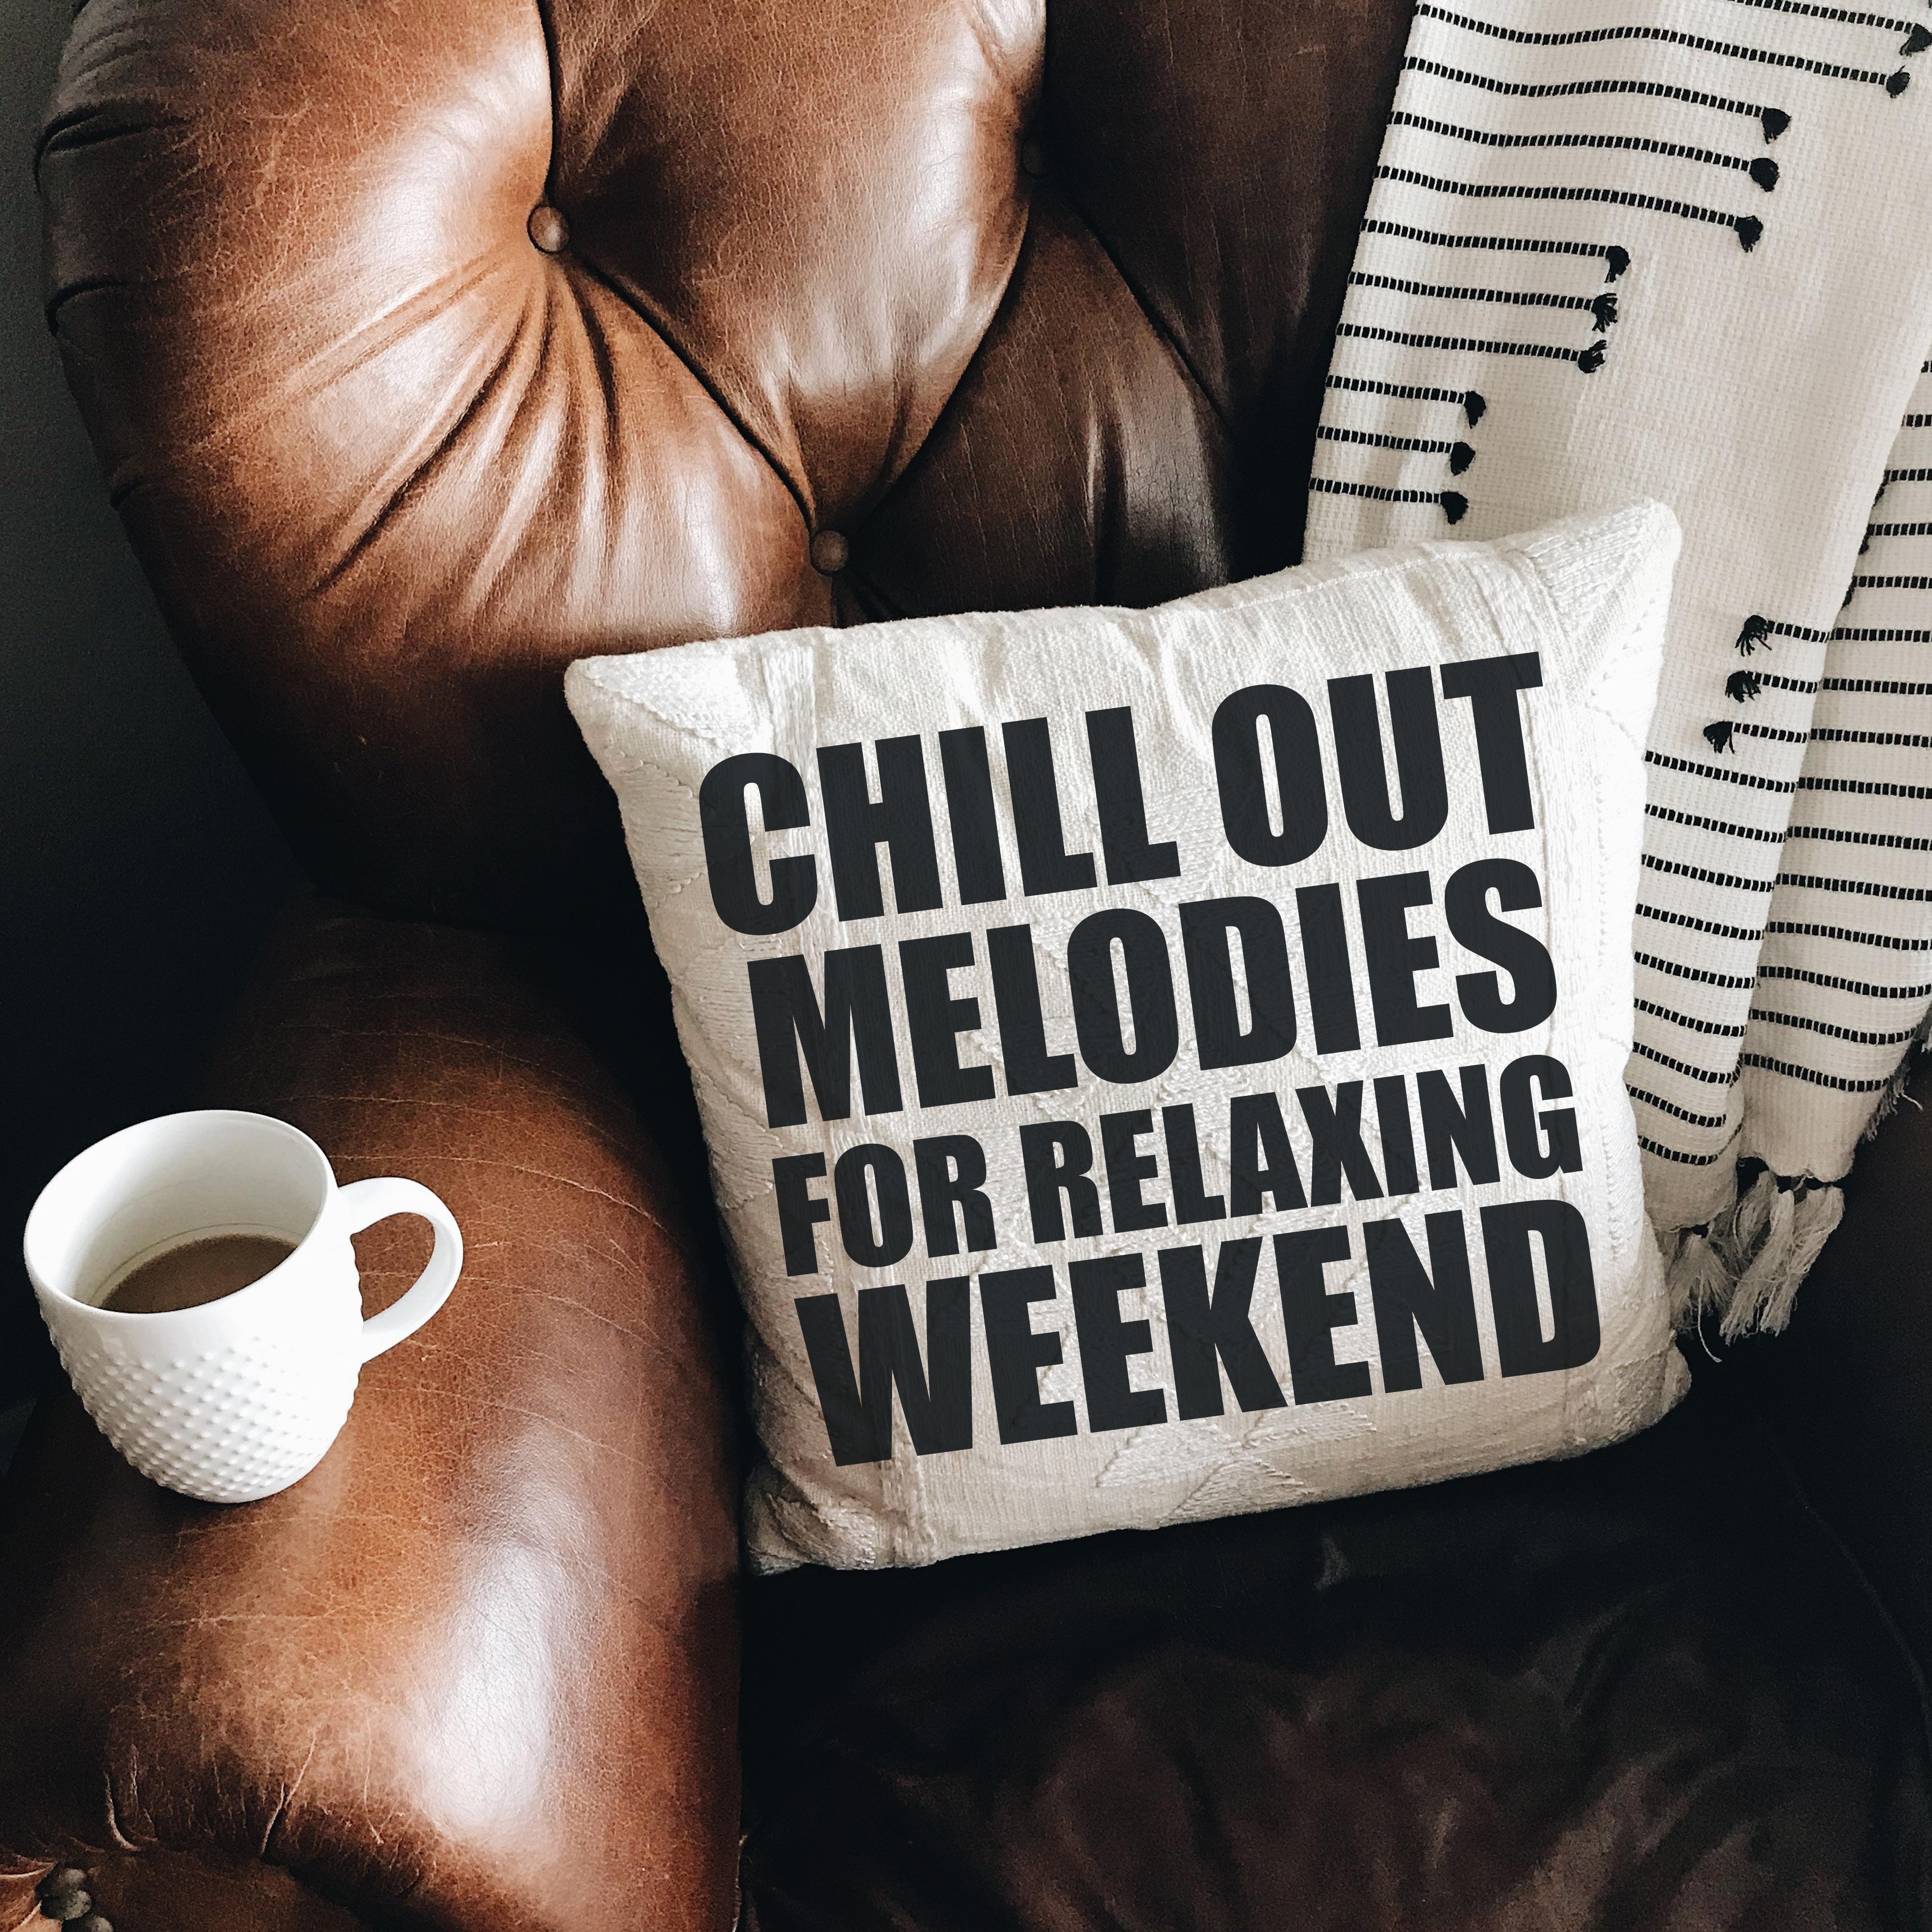 Weekend лучшее. Weekend Chill. Relaxing weekend. Weekends Chill. Худак с надписью weekend and Chill.